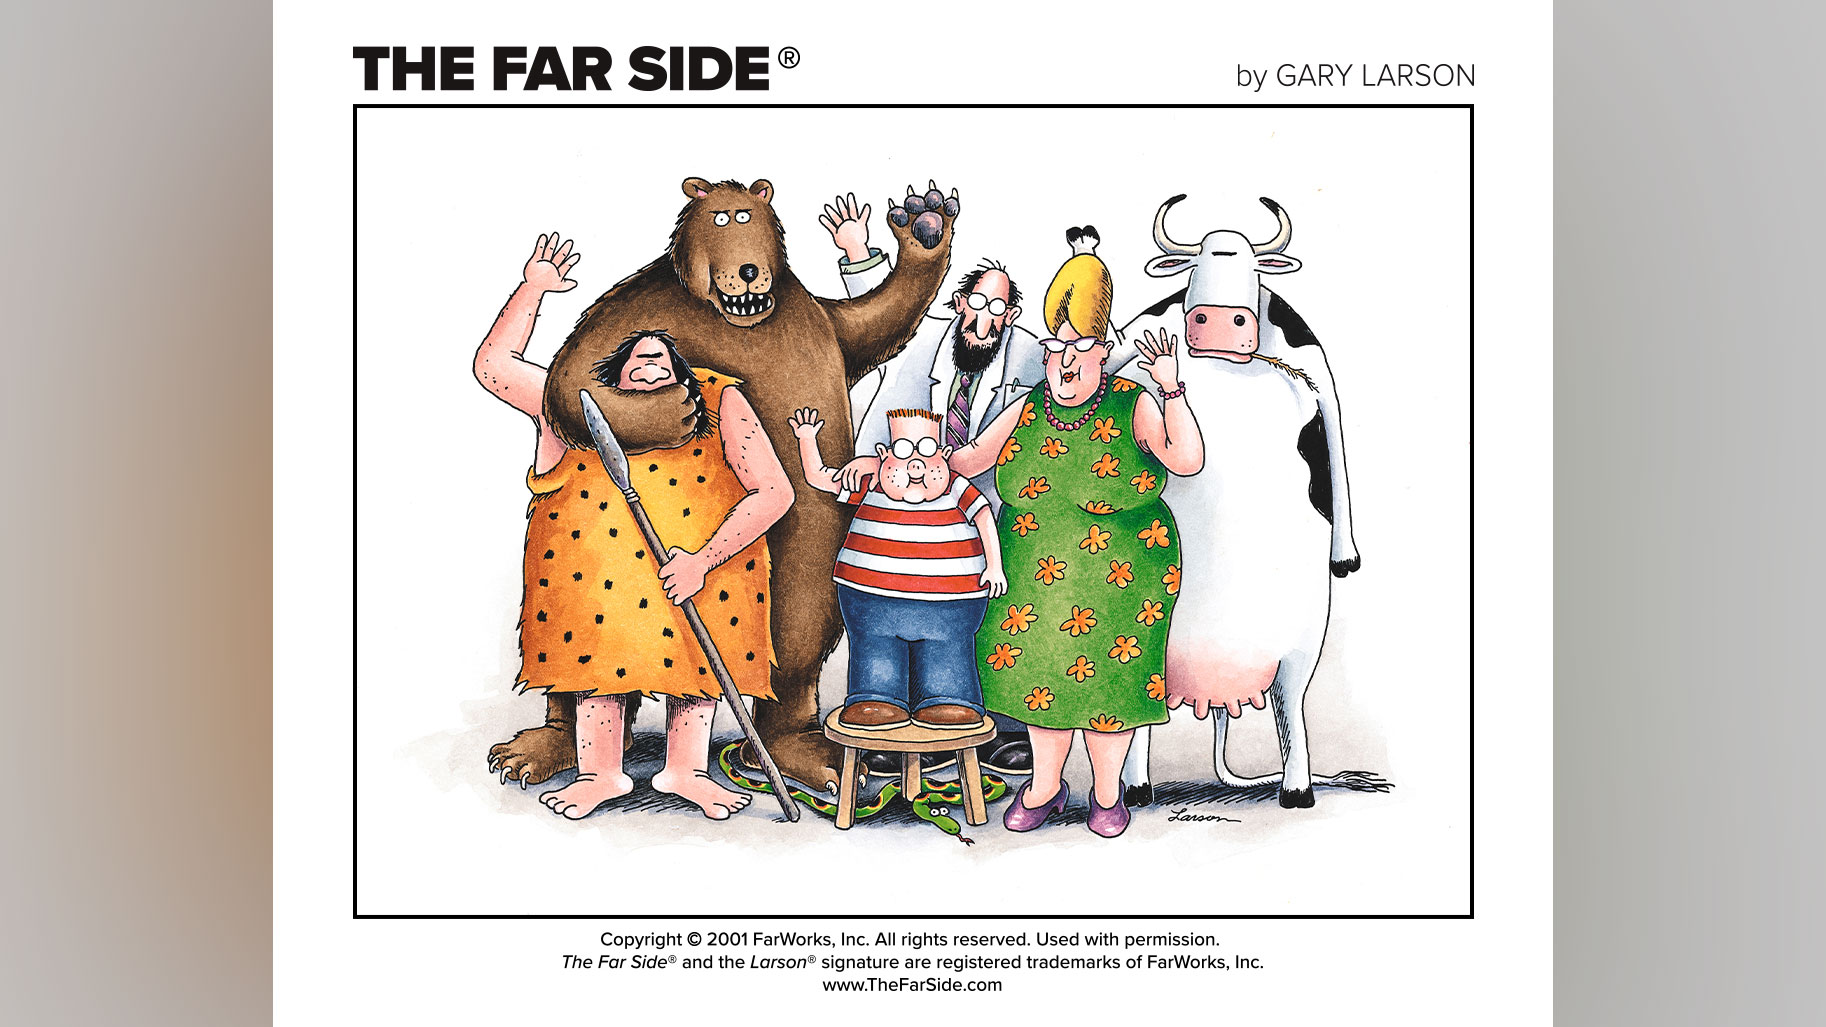 Gary Larson, 'Far Side' cartoonist, publishes first new work in 25 years -  CNN Style